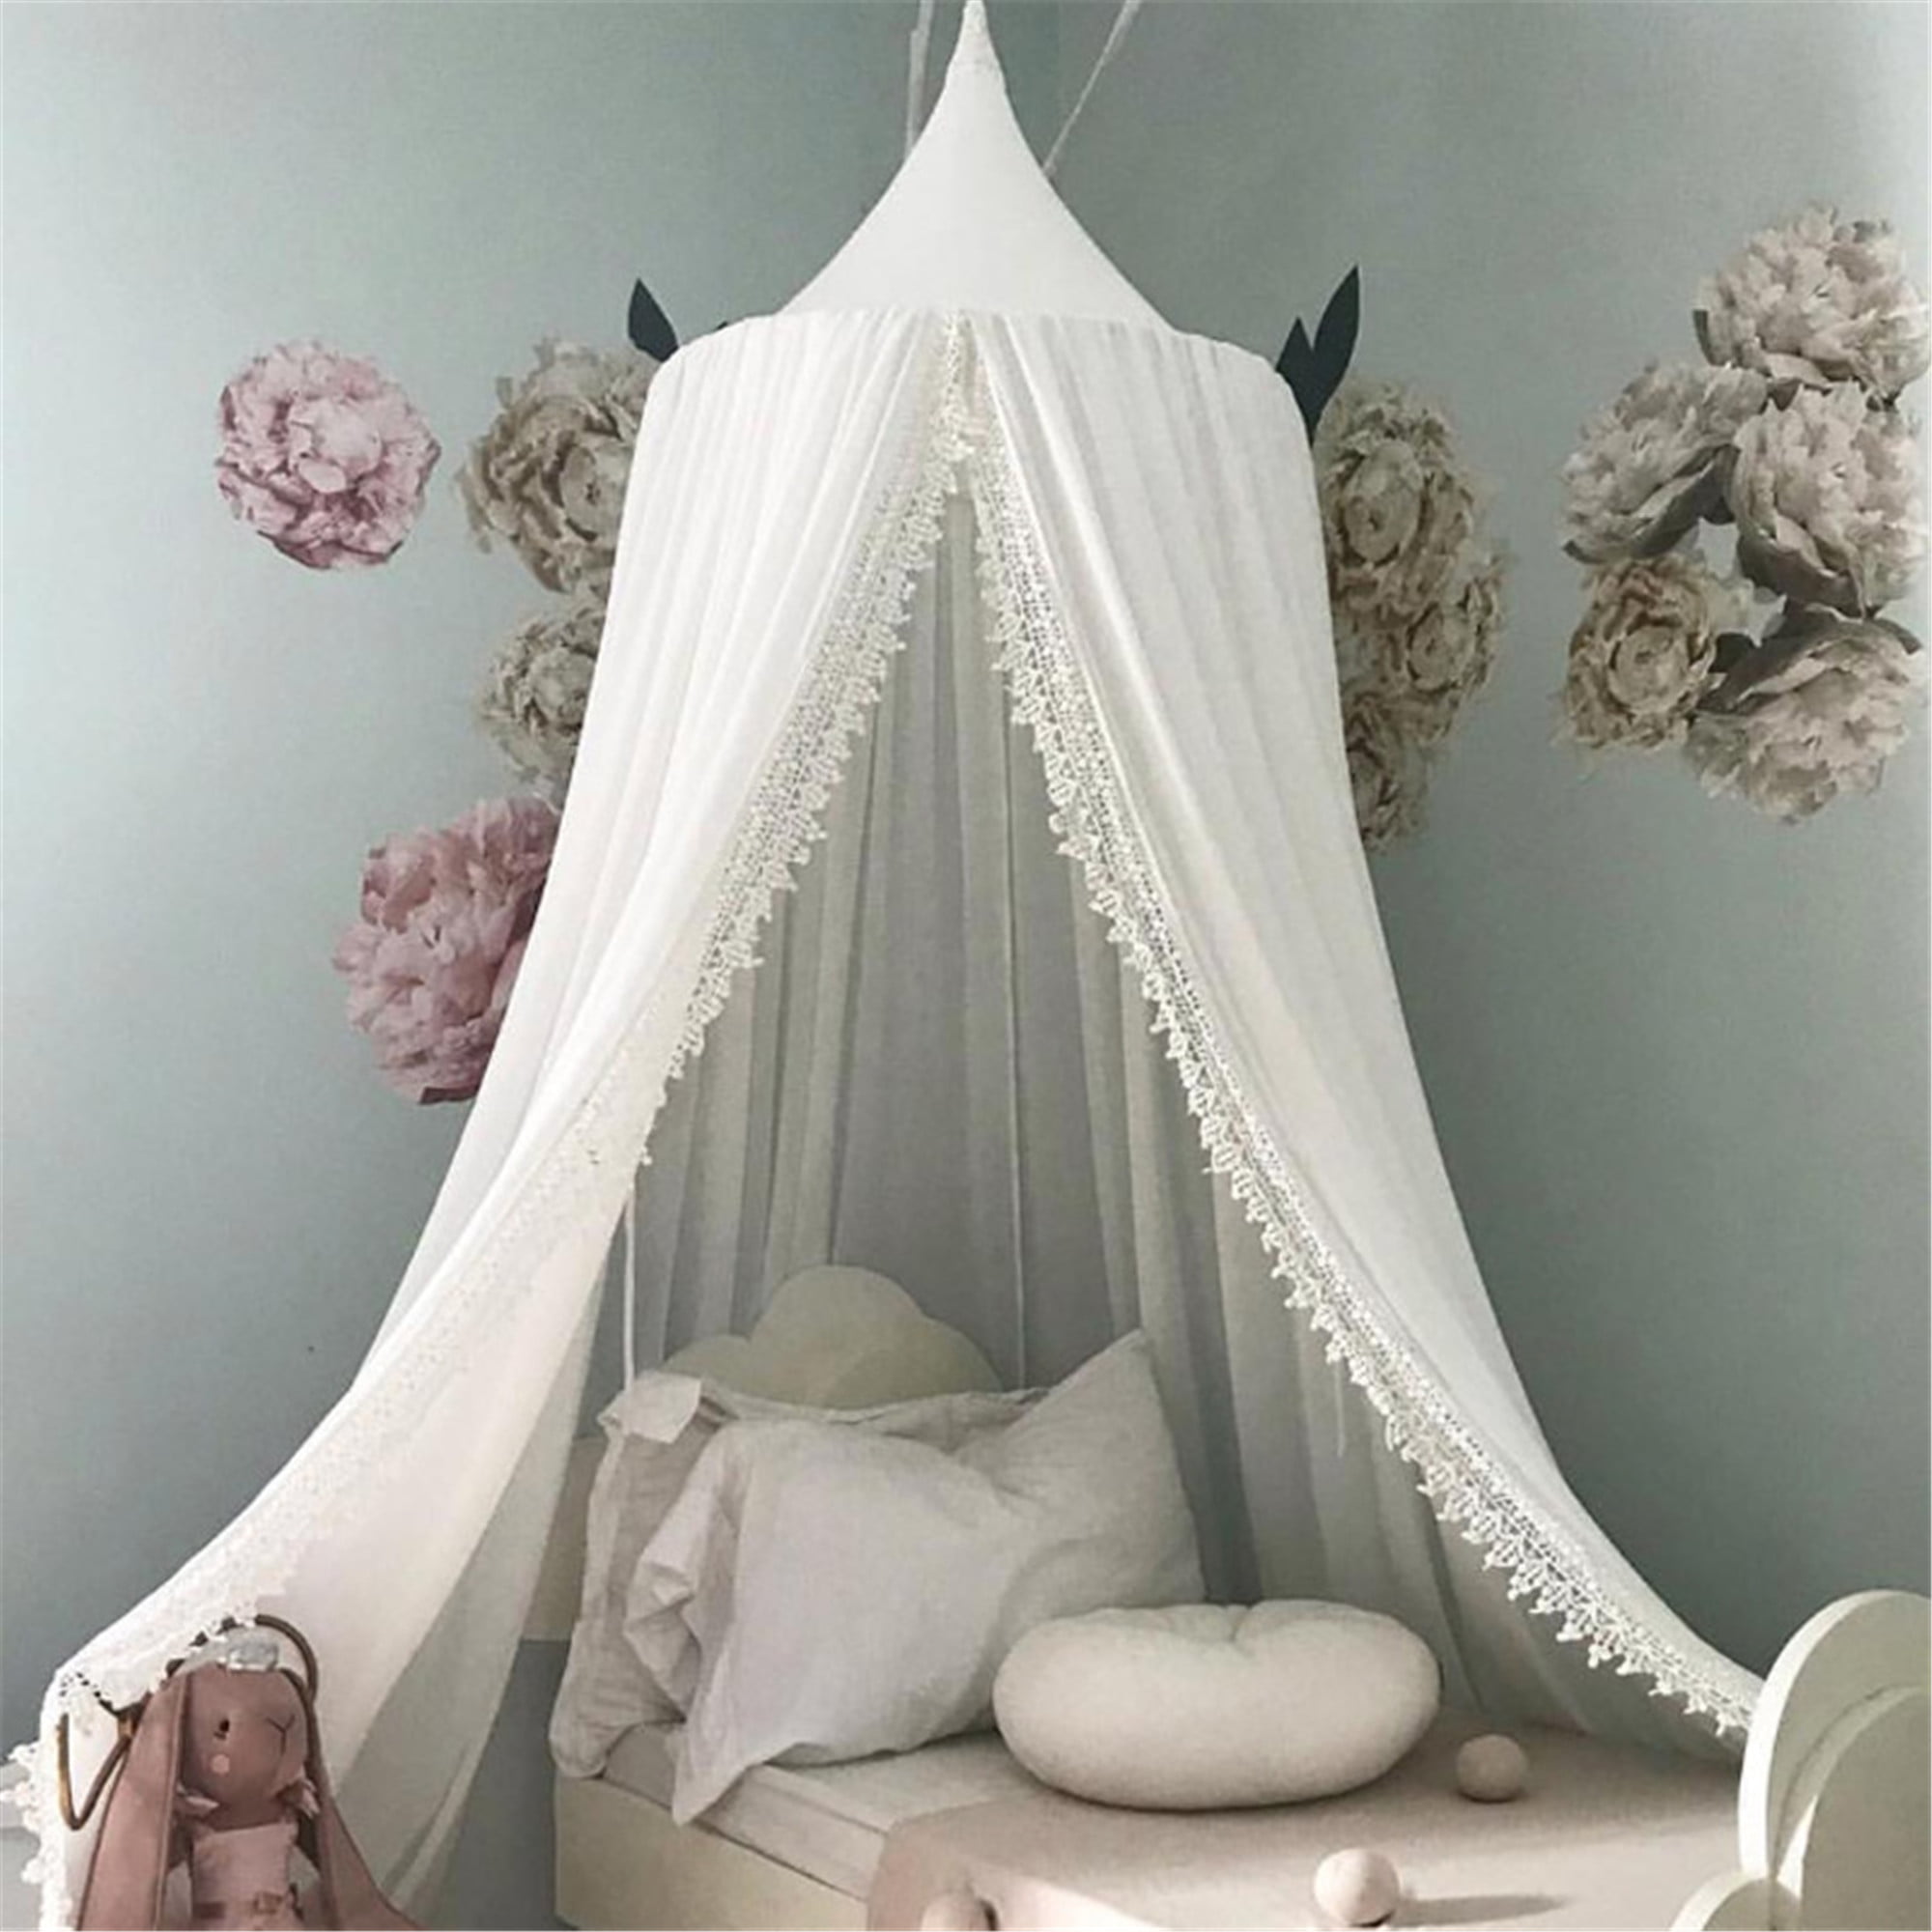 Details about   Kids Disney Bed Canopy Bedcover Mosquito Net Curtain Bedding Dome Tent Cotton 